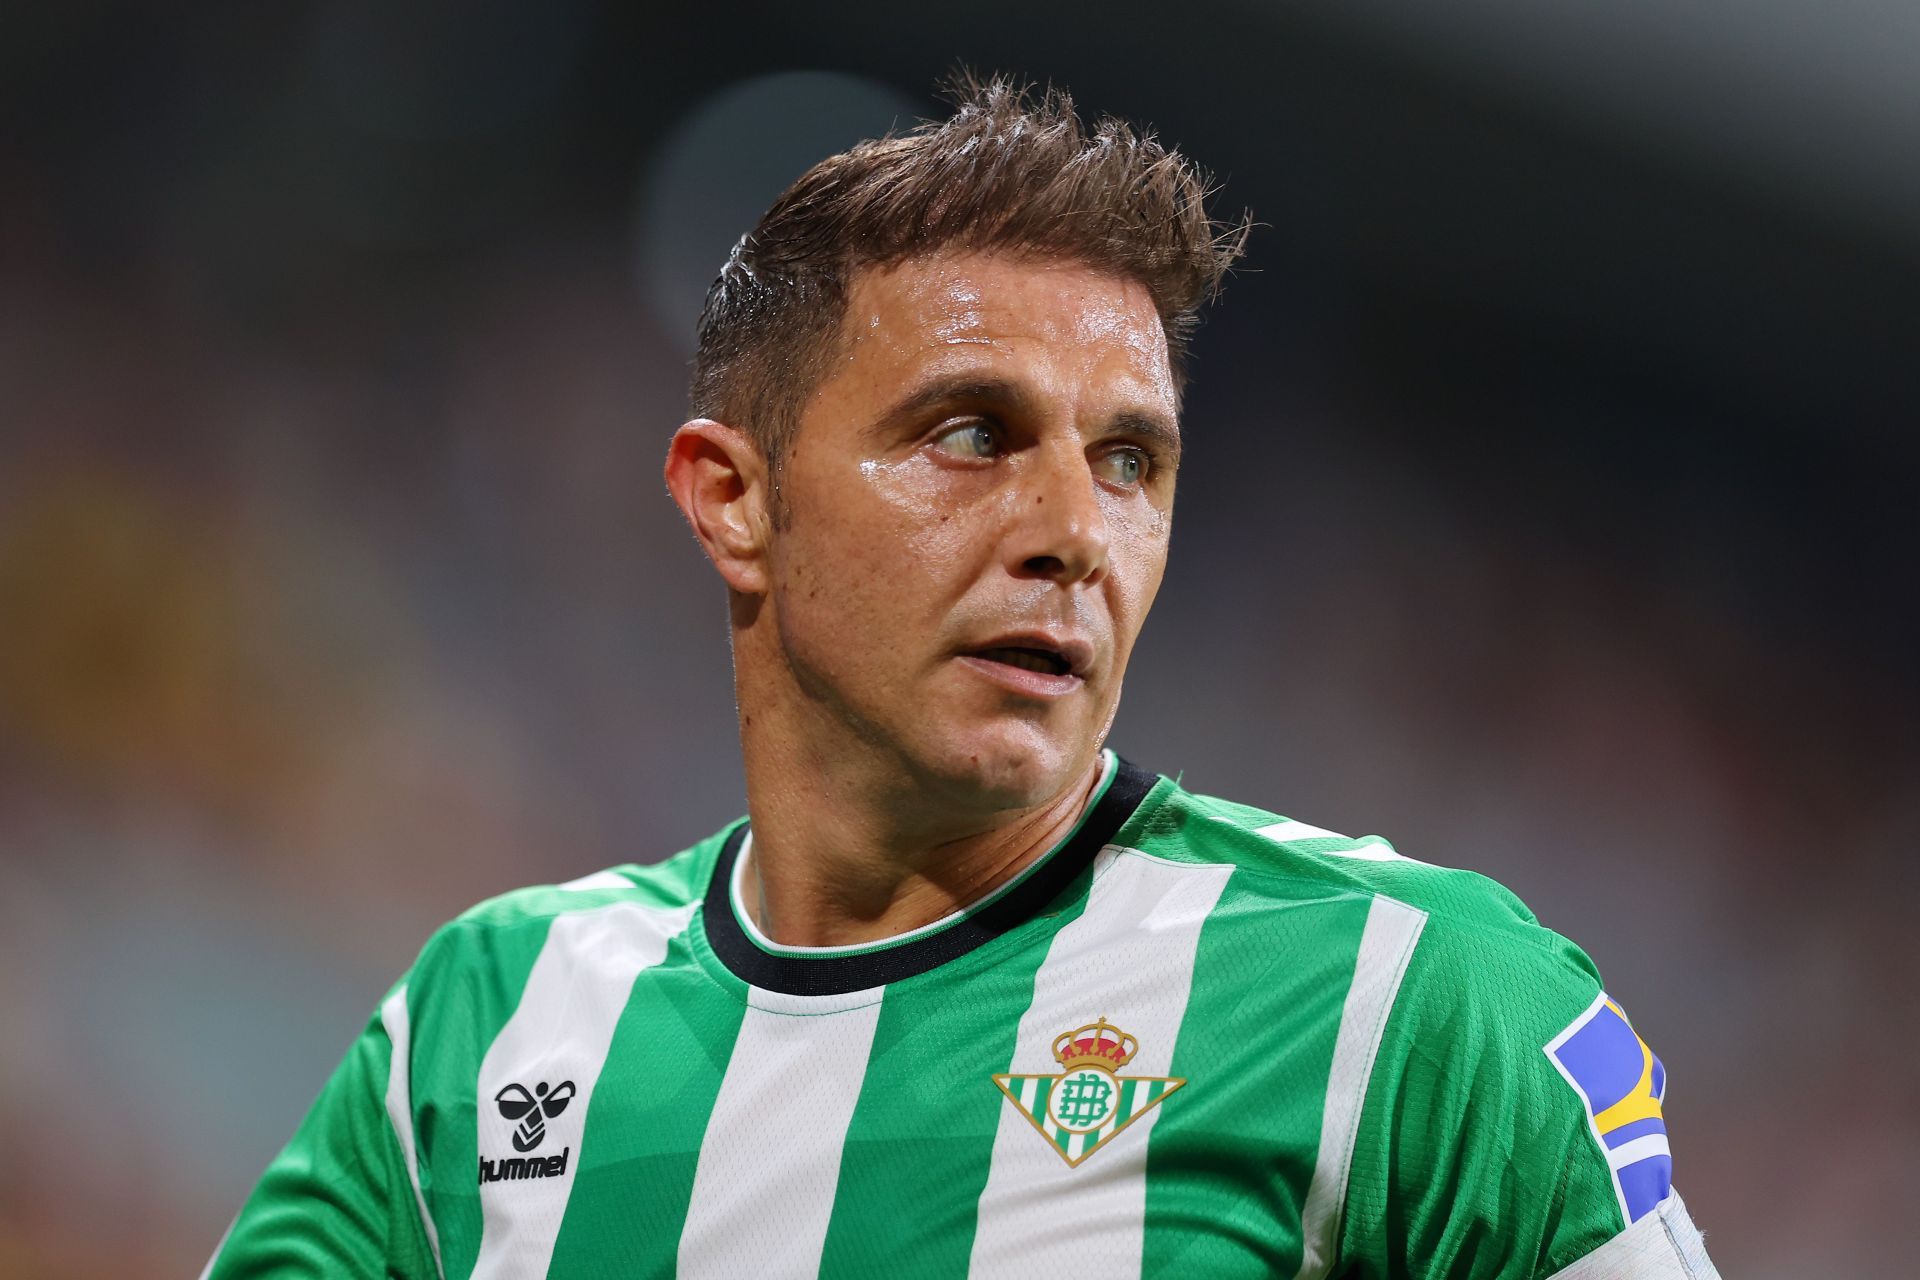 Joaquin is the oldest player - LaLiga Santander